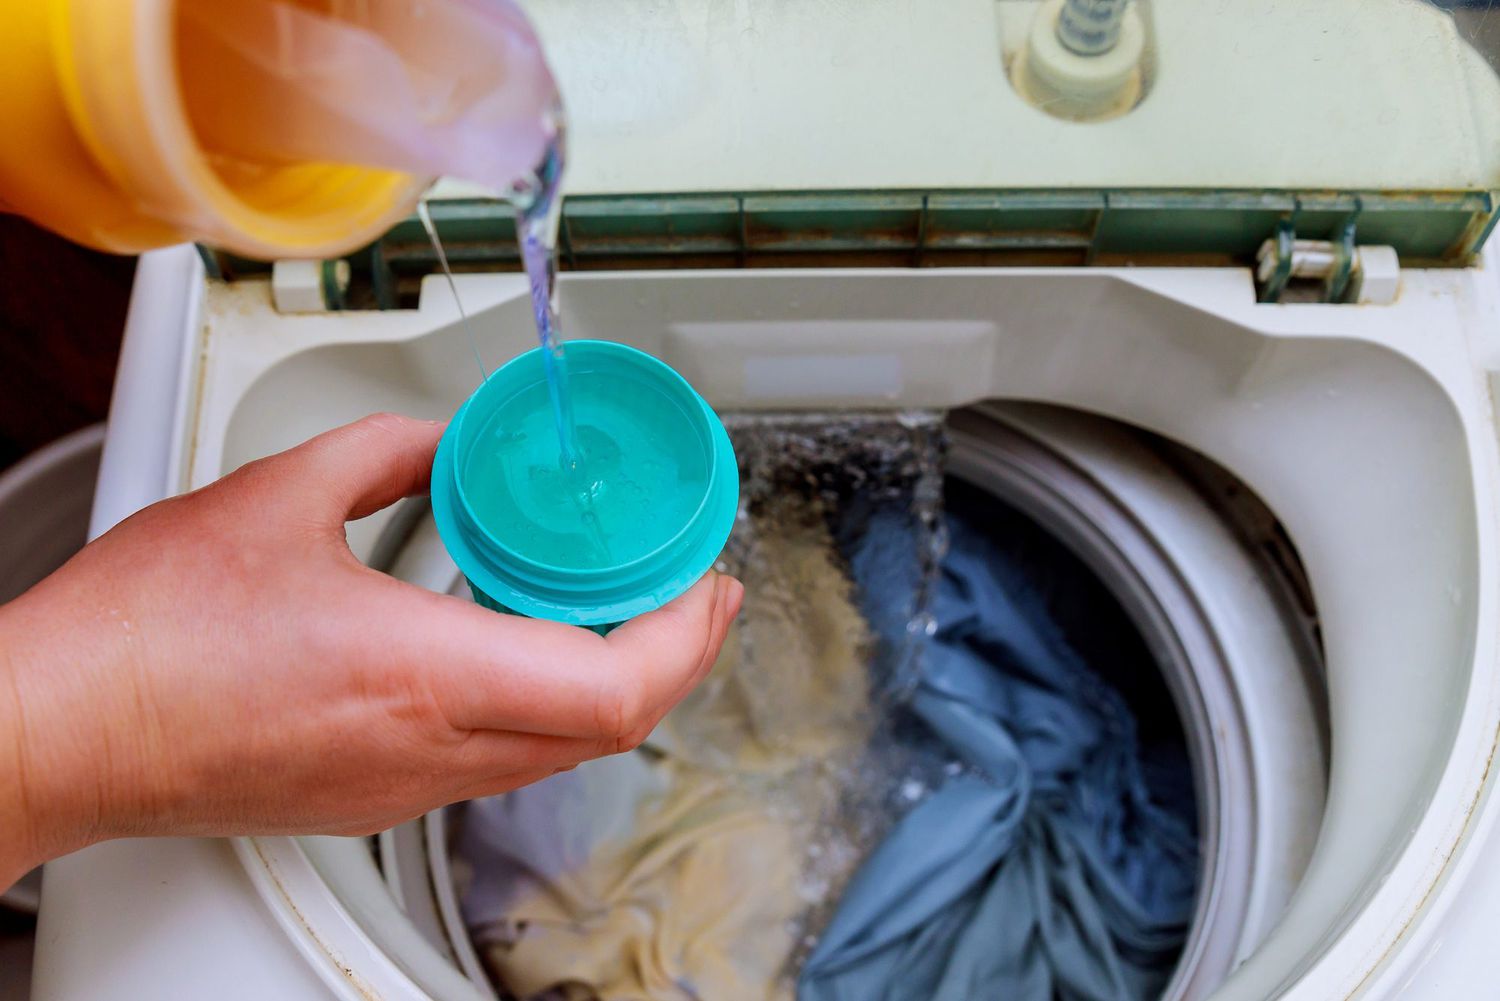 North Carolina Town Asked Not to Do Laundry for 5 Days | PEOPLE.com